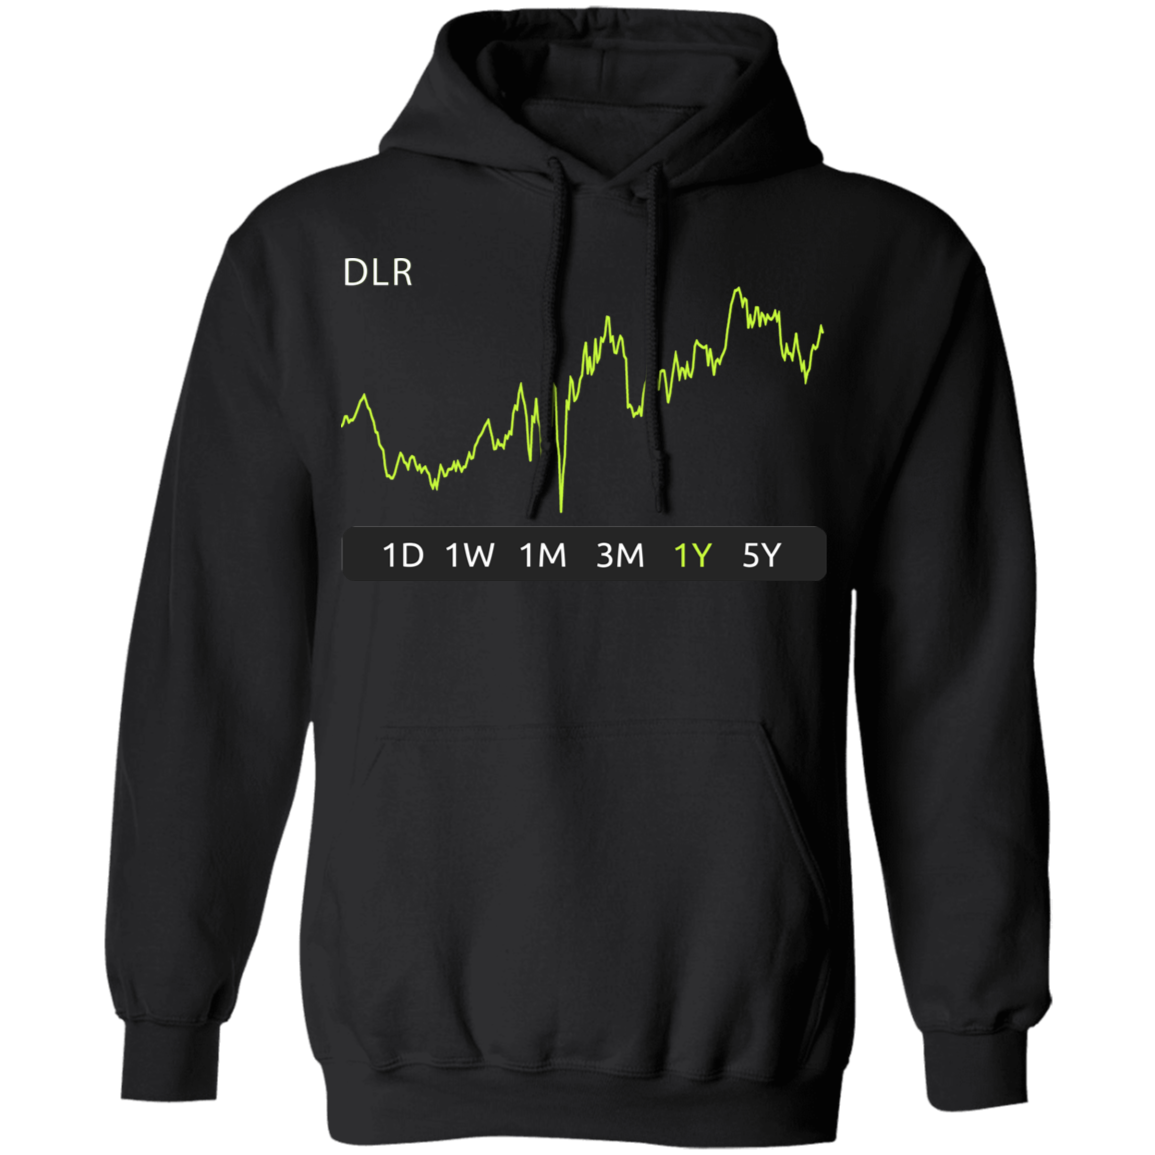 DLR Stock 1y Pullover Hoodie